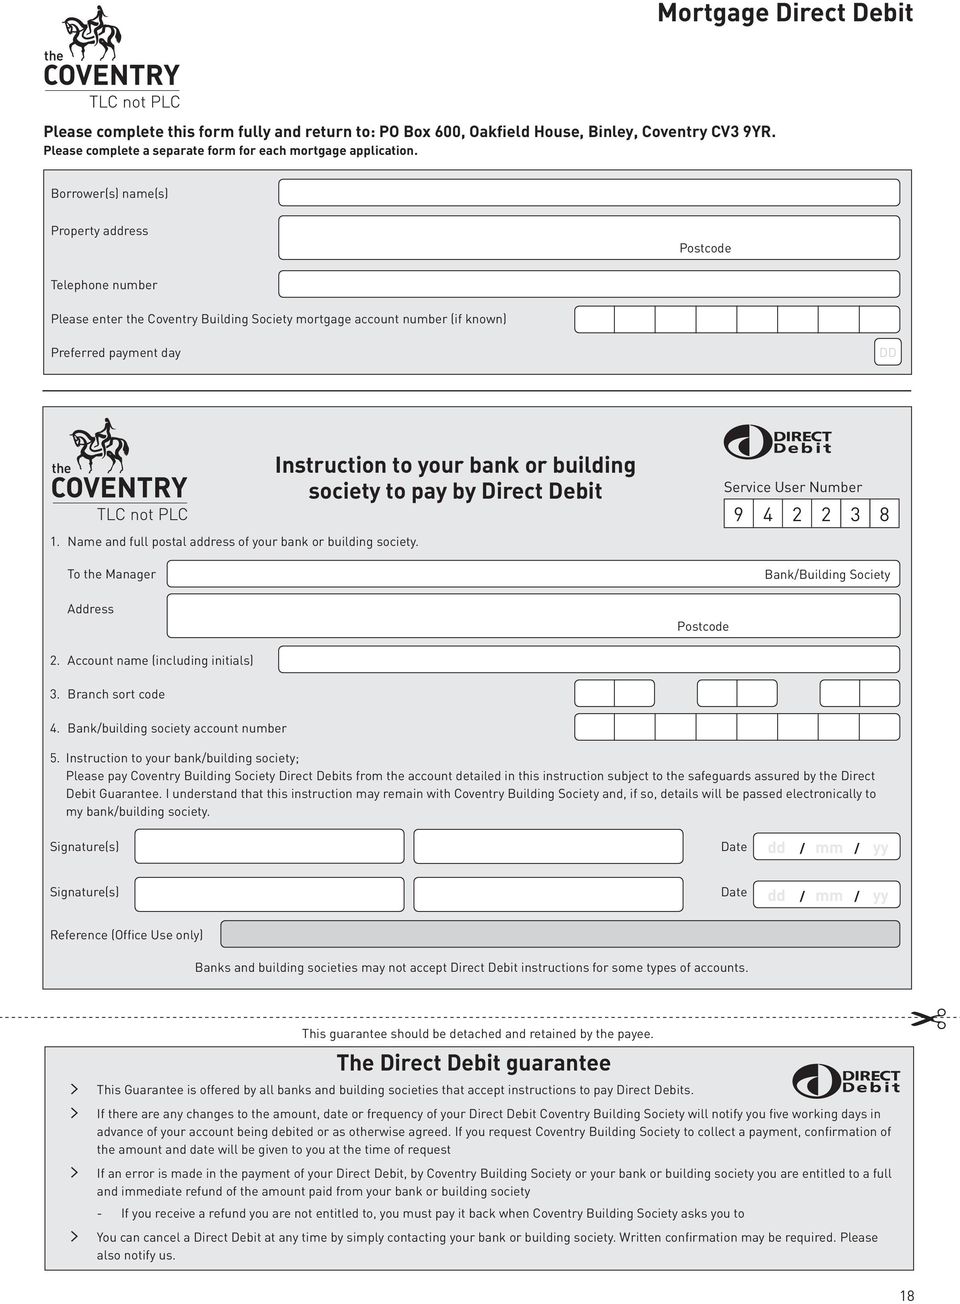 Name and full postal address of your bank or building society.